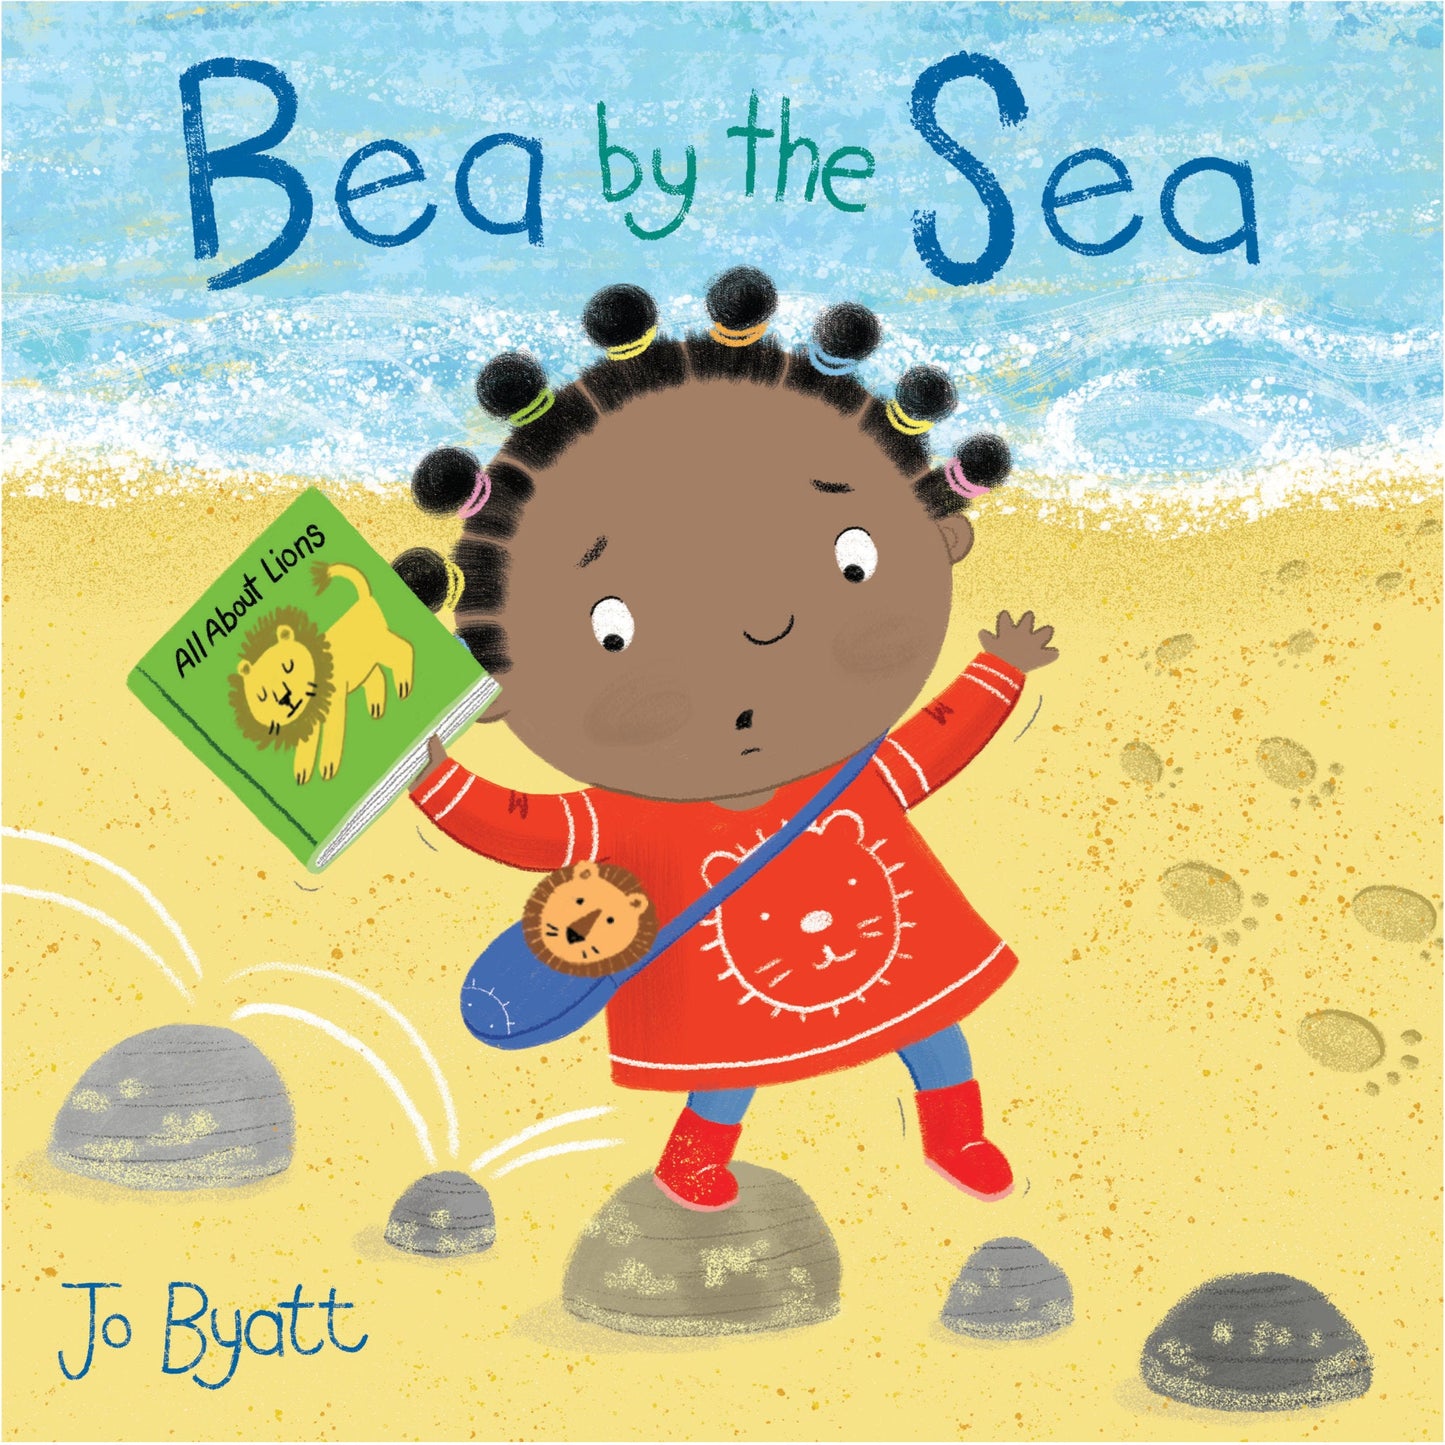 Bea by the Sea (Softcover Edition)